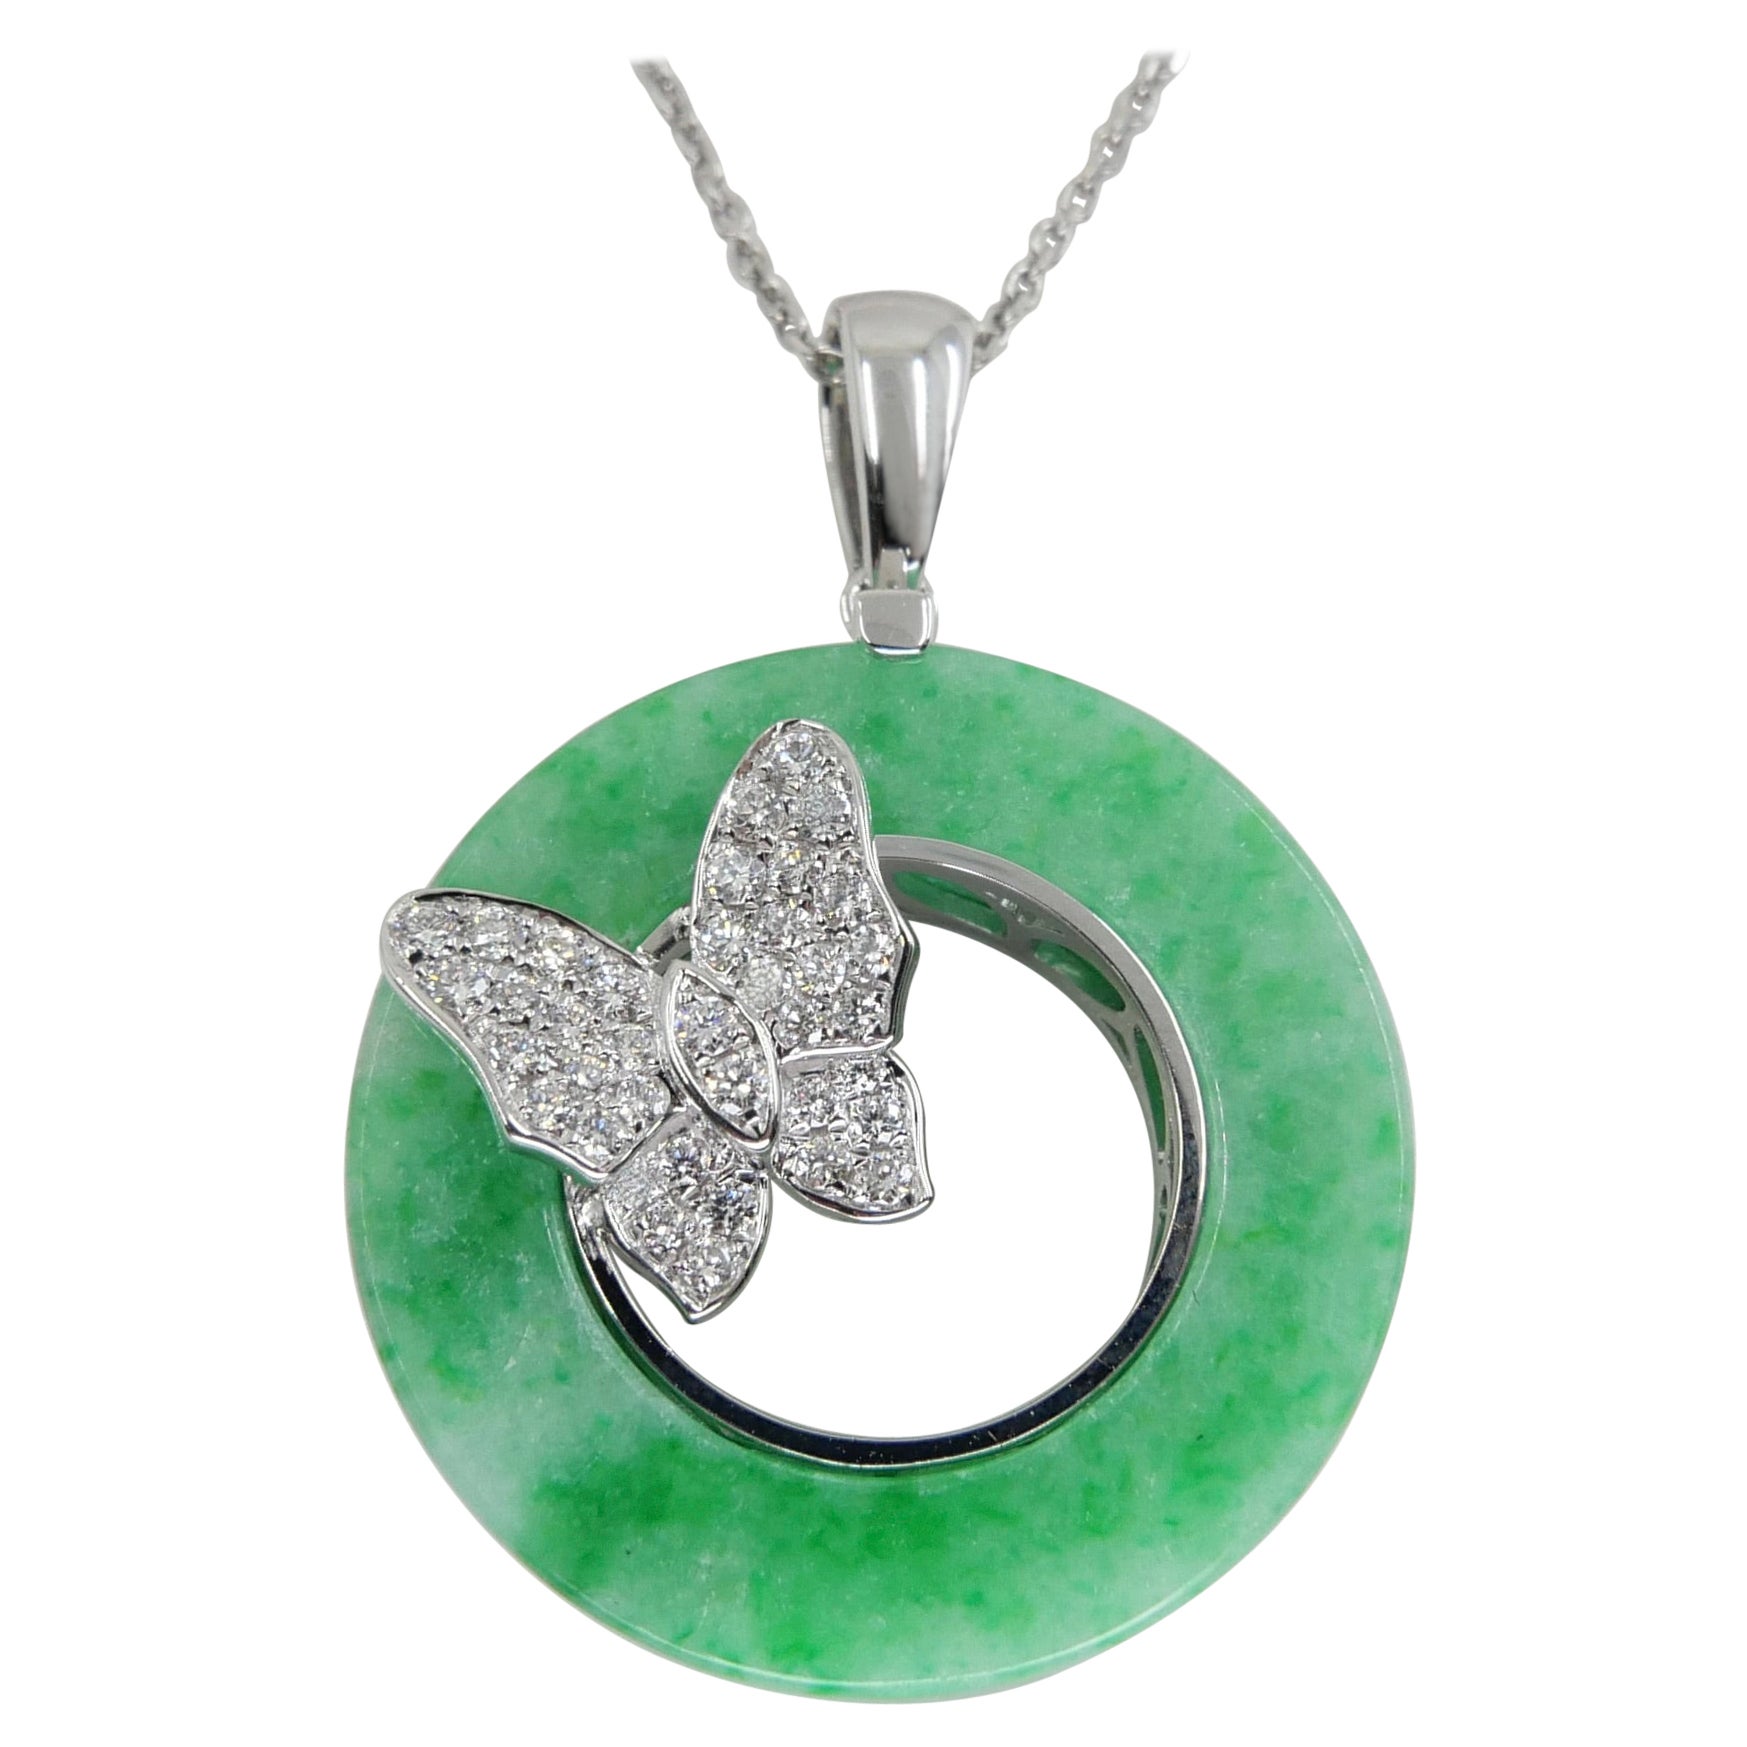 Certified Apple Green Jade 13.72 Cts And Diamond Butterfly Pendant Necklace. 